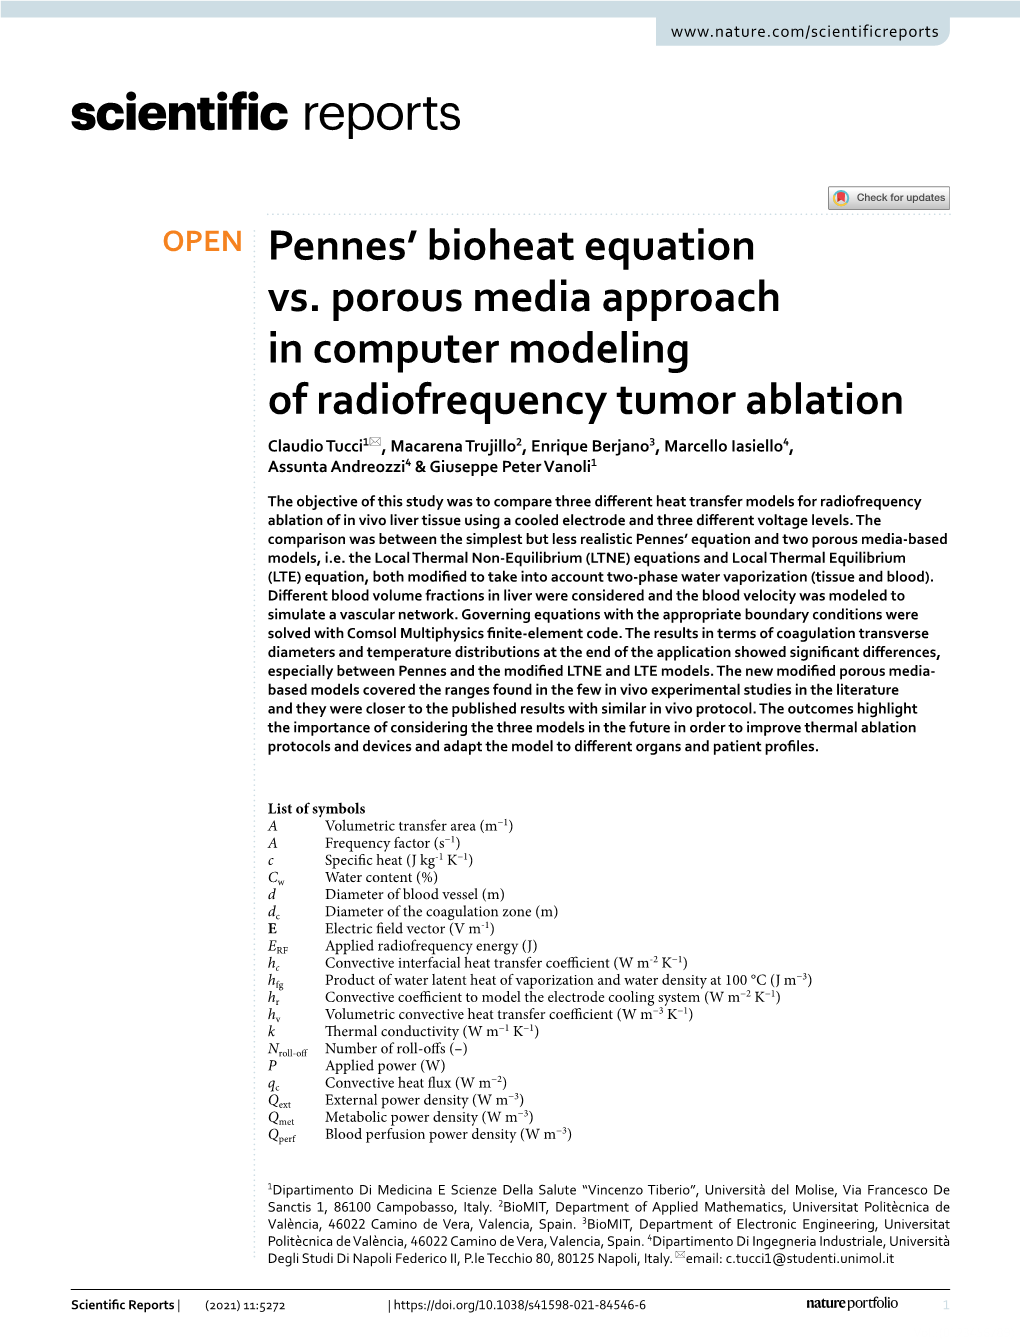 Pennes' Bioheat Equation Vs. Porous Media Approach in Computer